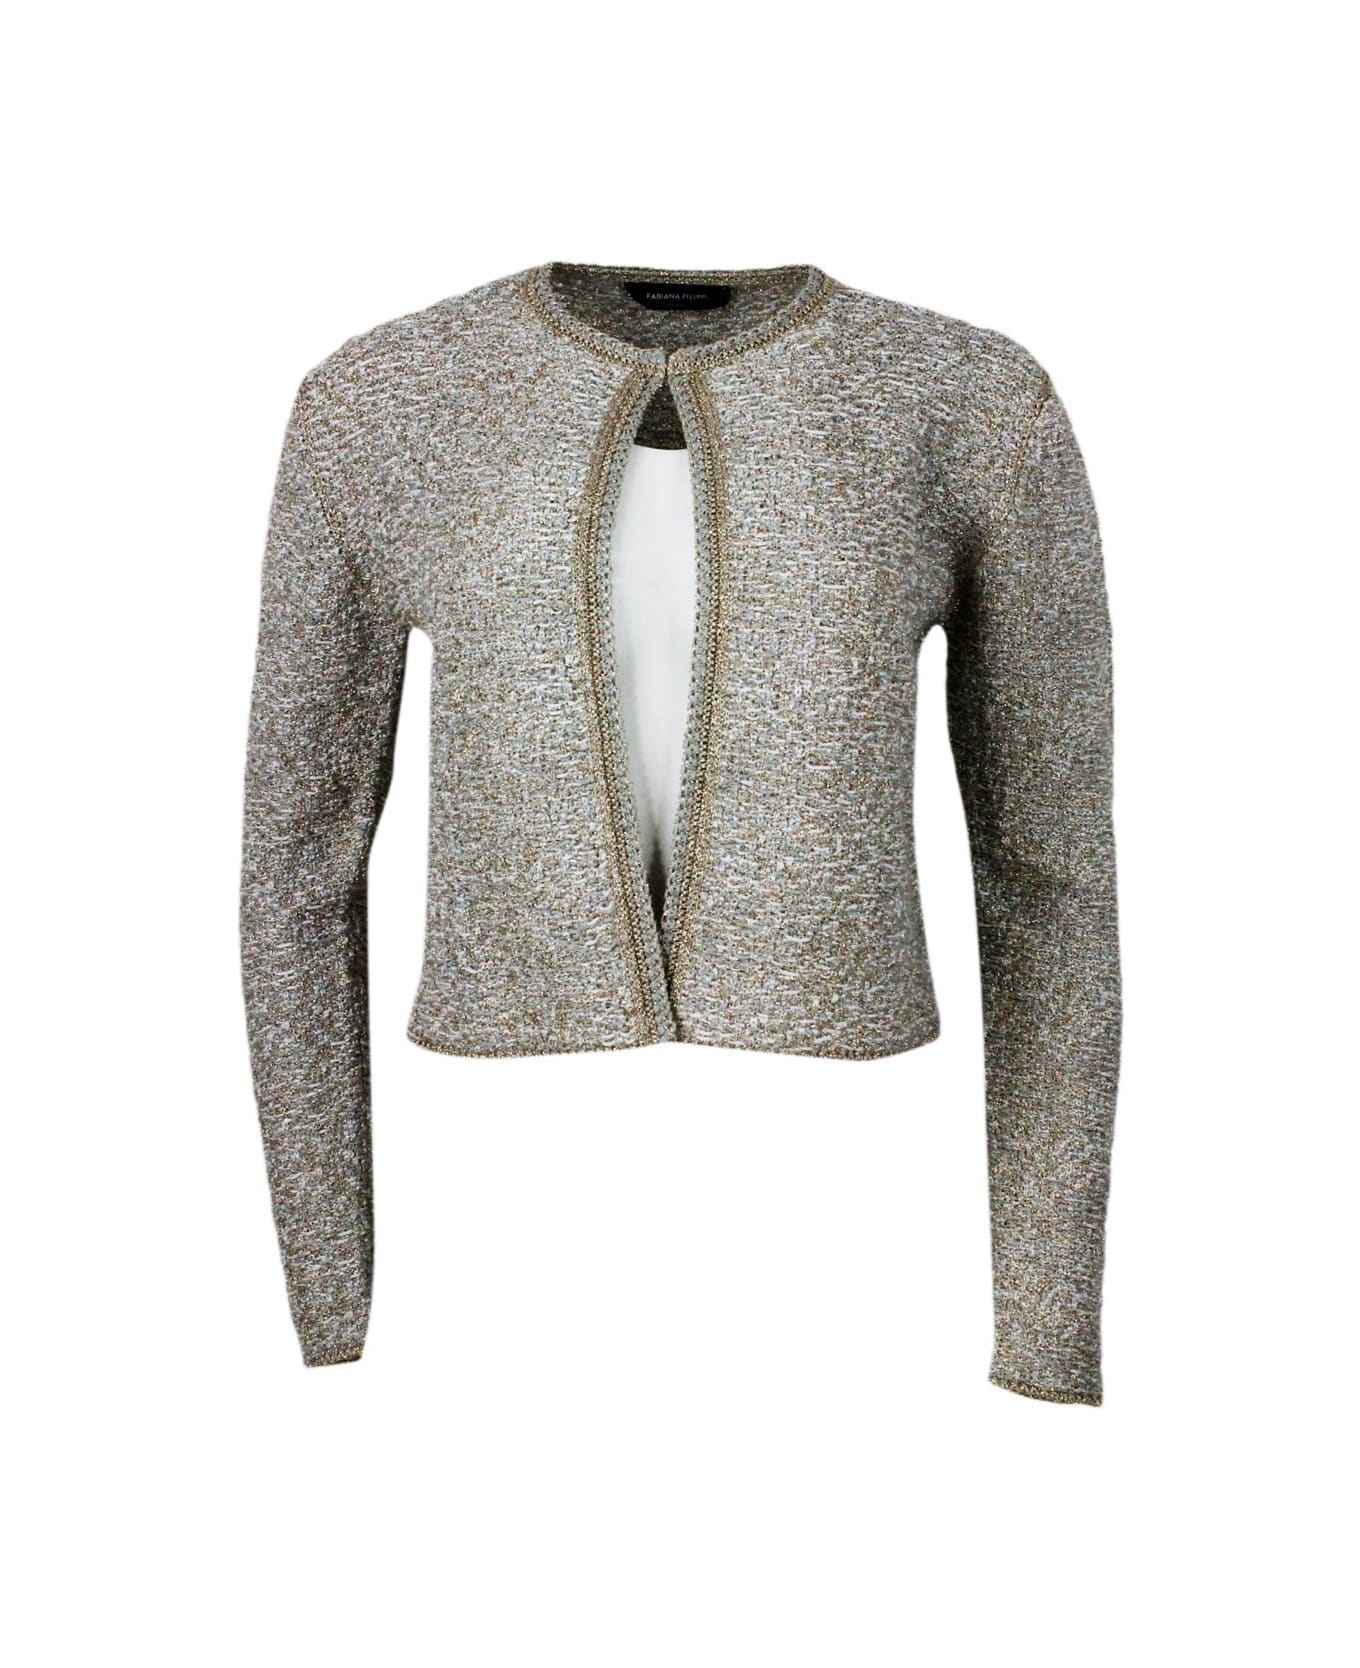 Fabiana Filippi Chanel-style Jacket Sweater Open On The Front And With Hook Closure Embellished With Bright Lurex Threads - Grigio chiaro/bianco/oro カーディガン